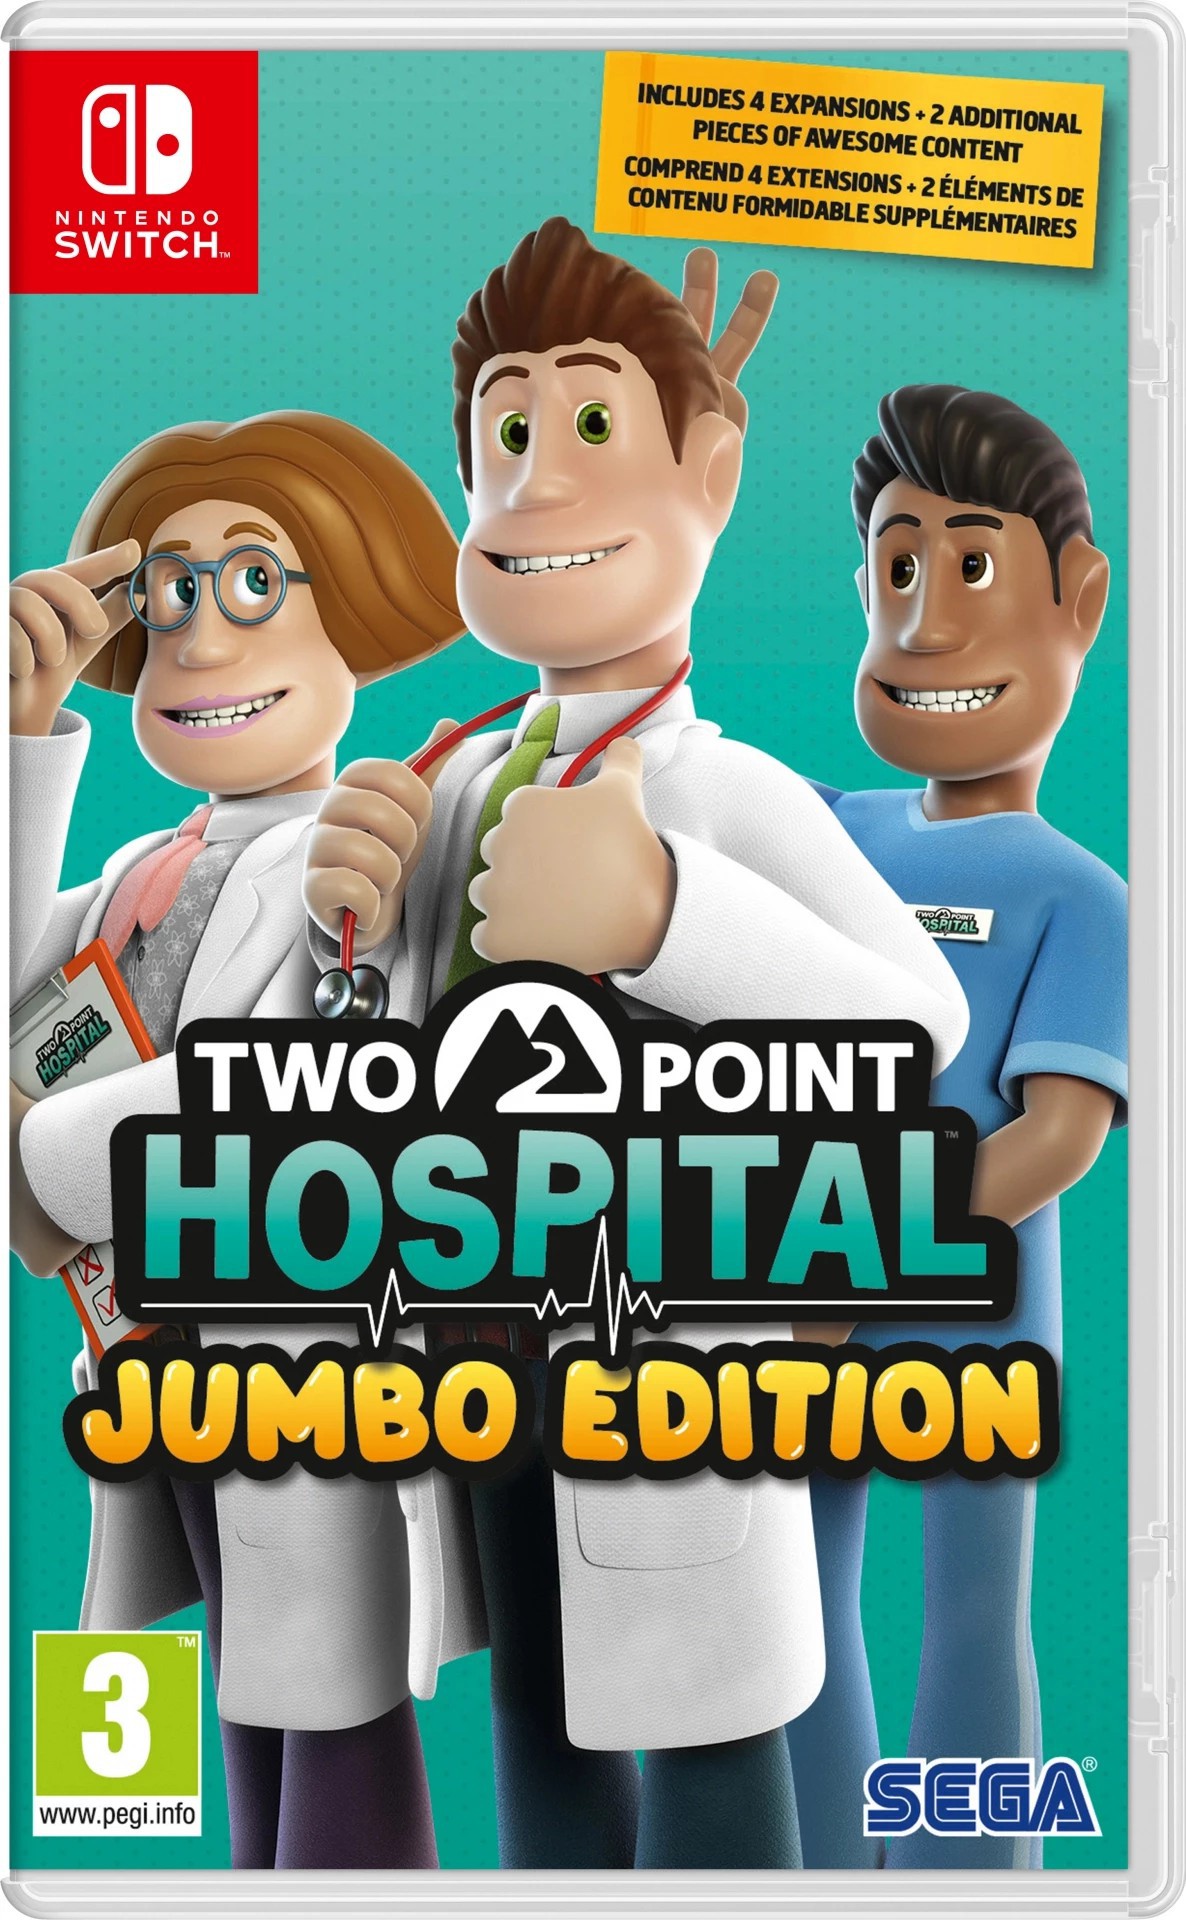 Two Point Hospital (Jumbo Edition) - Nintendo Switch Games